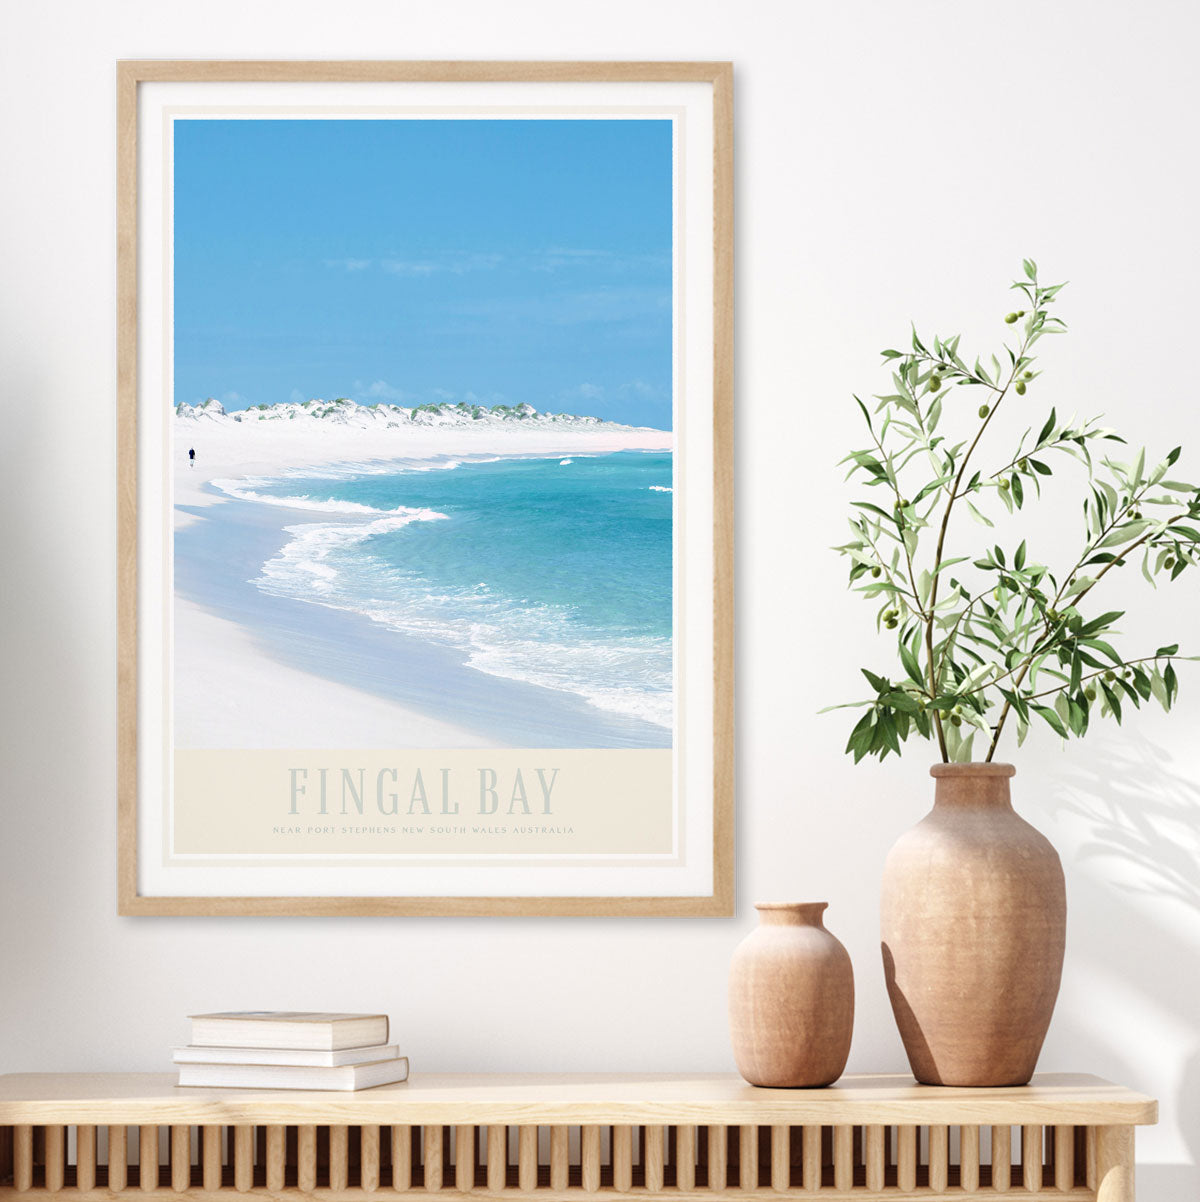 Fingal bay vintage retro poster print by places we luv